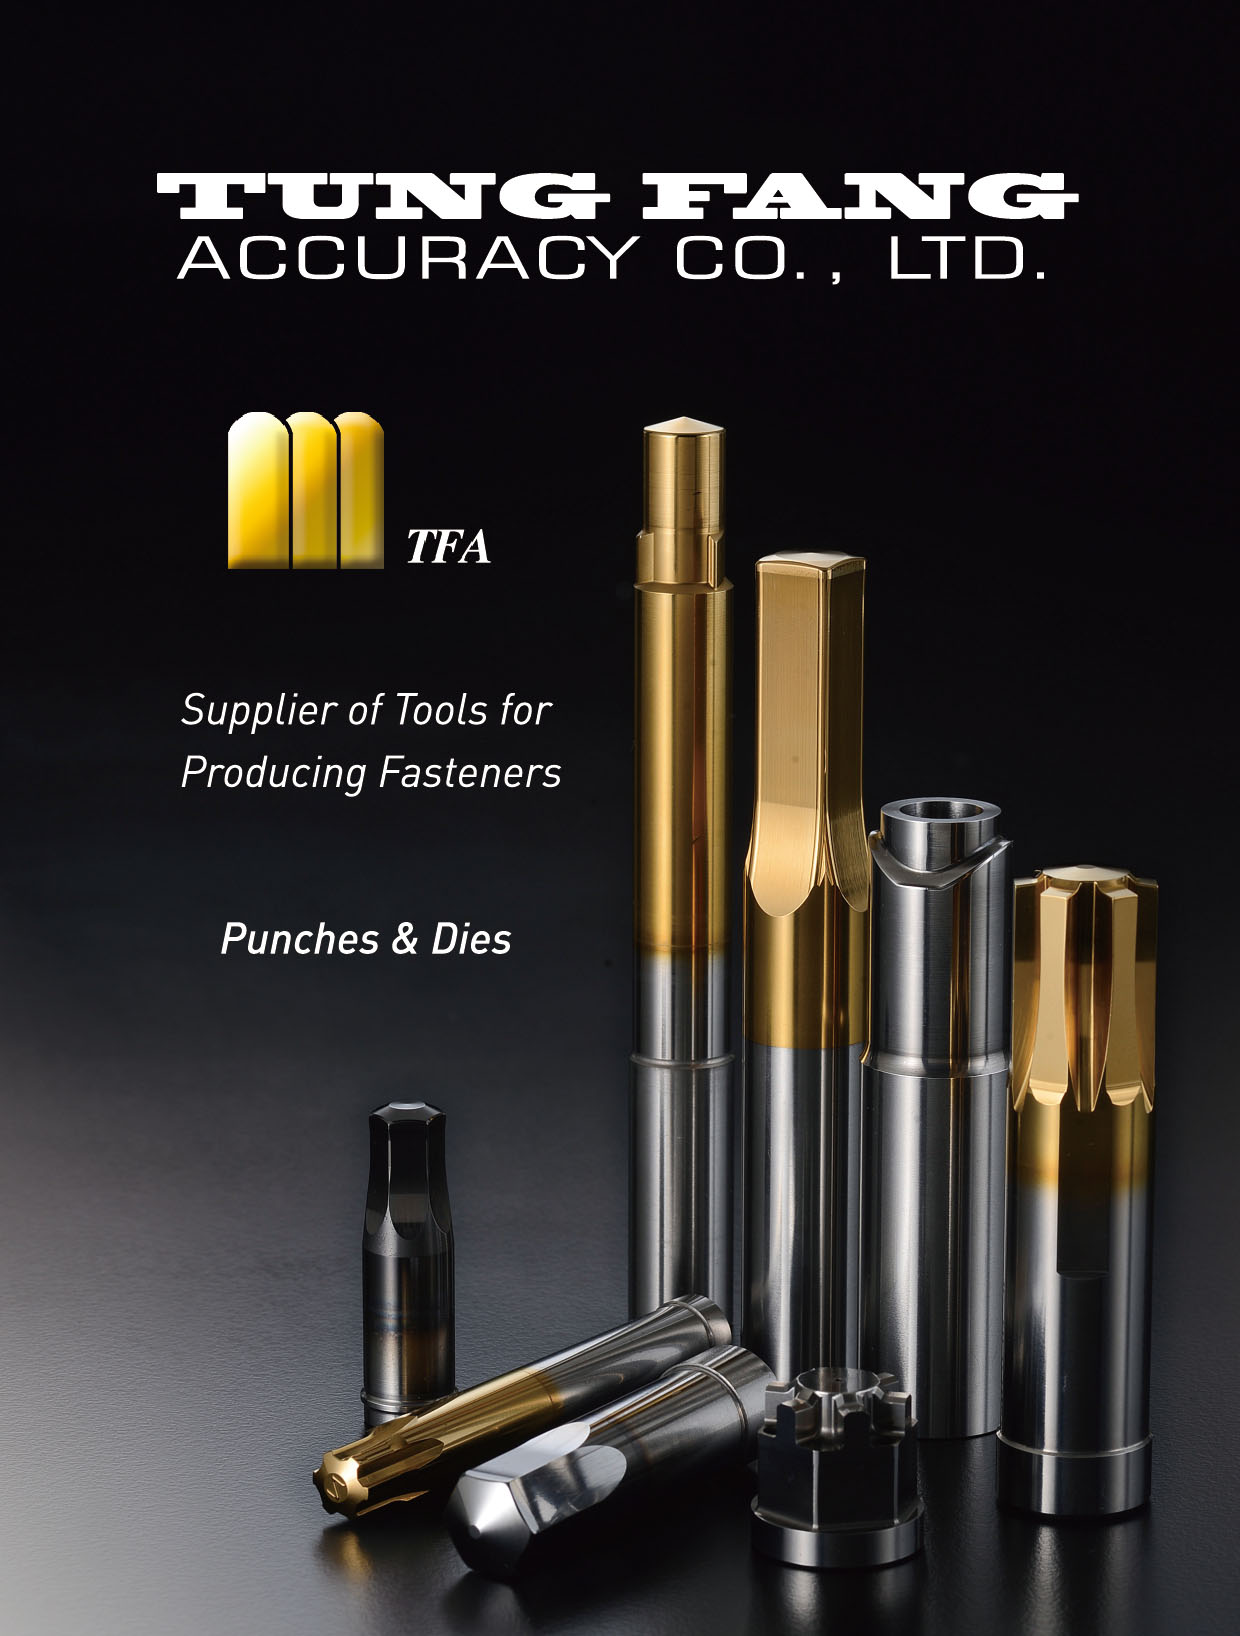 TUNG FANG ACCURACY CO., LTD. _Online Catalogues